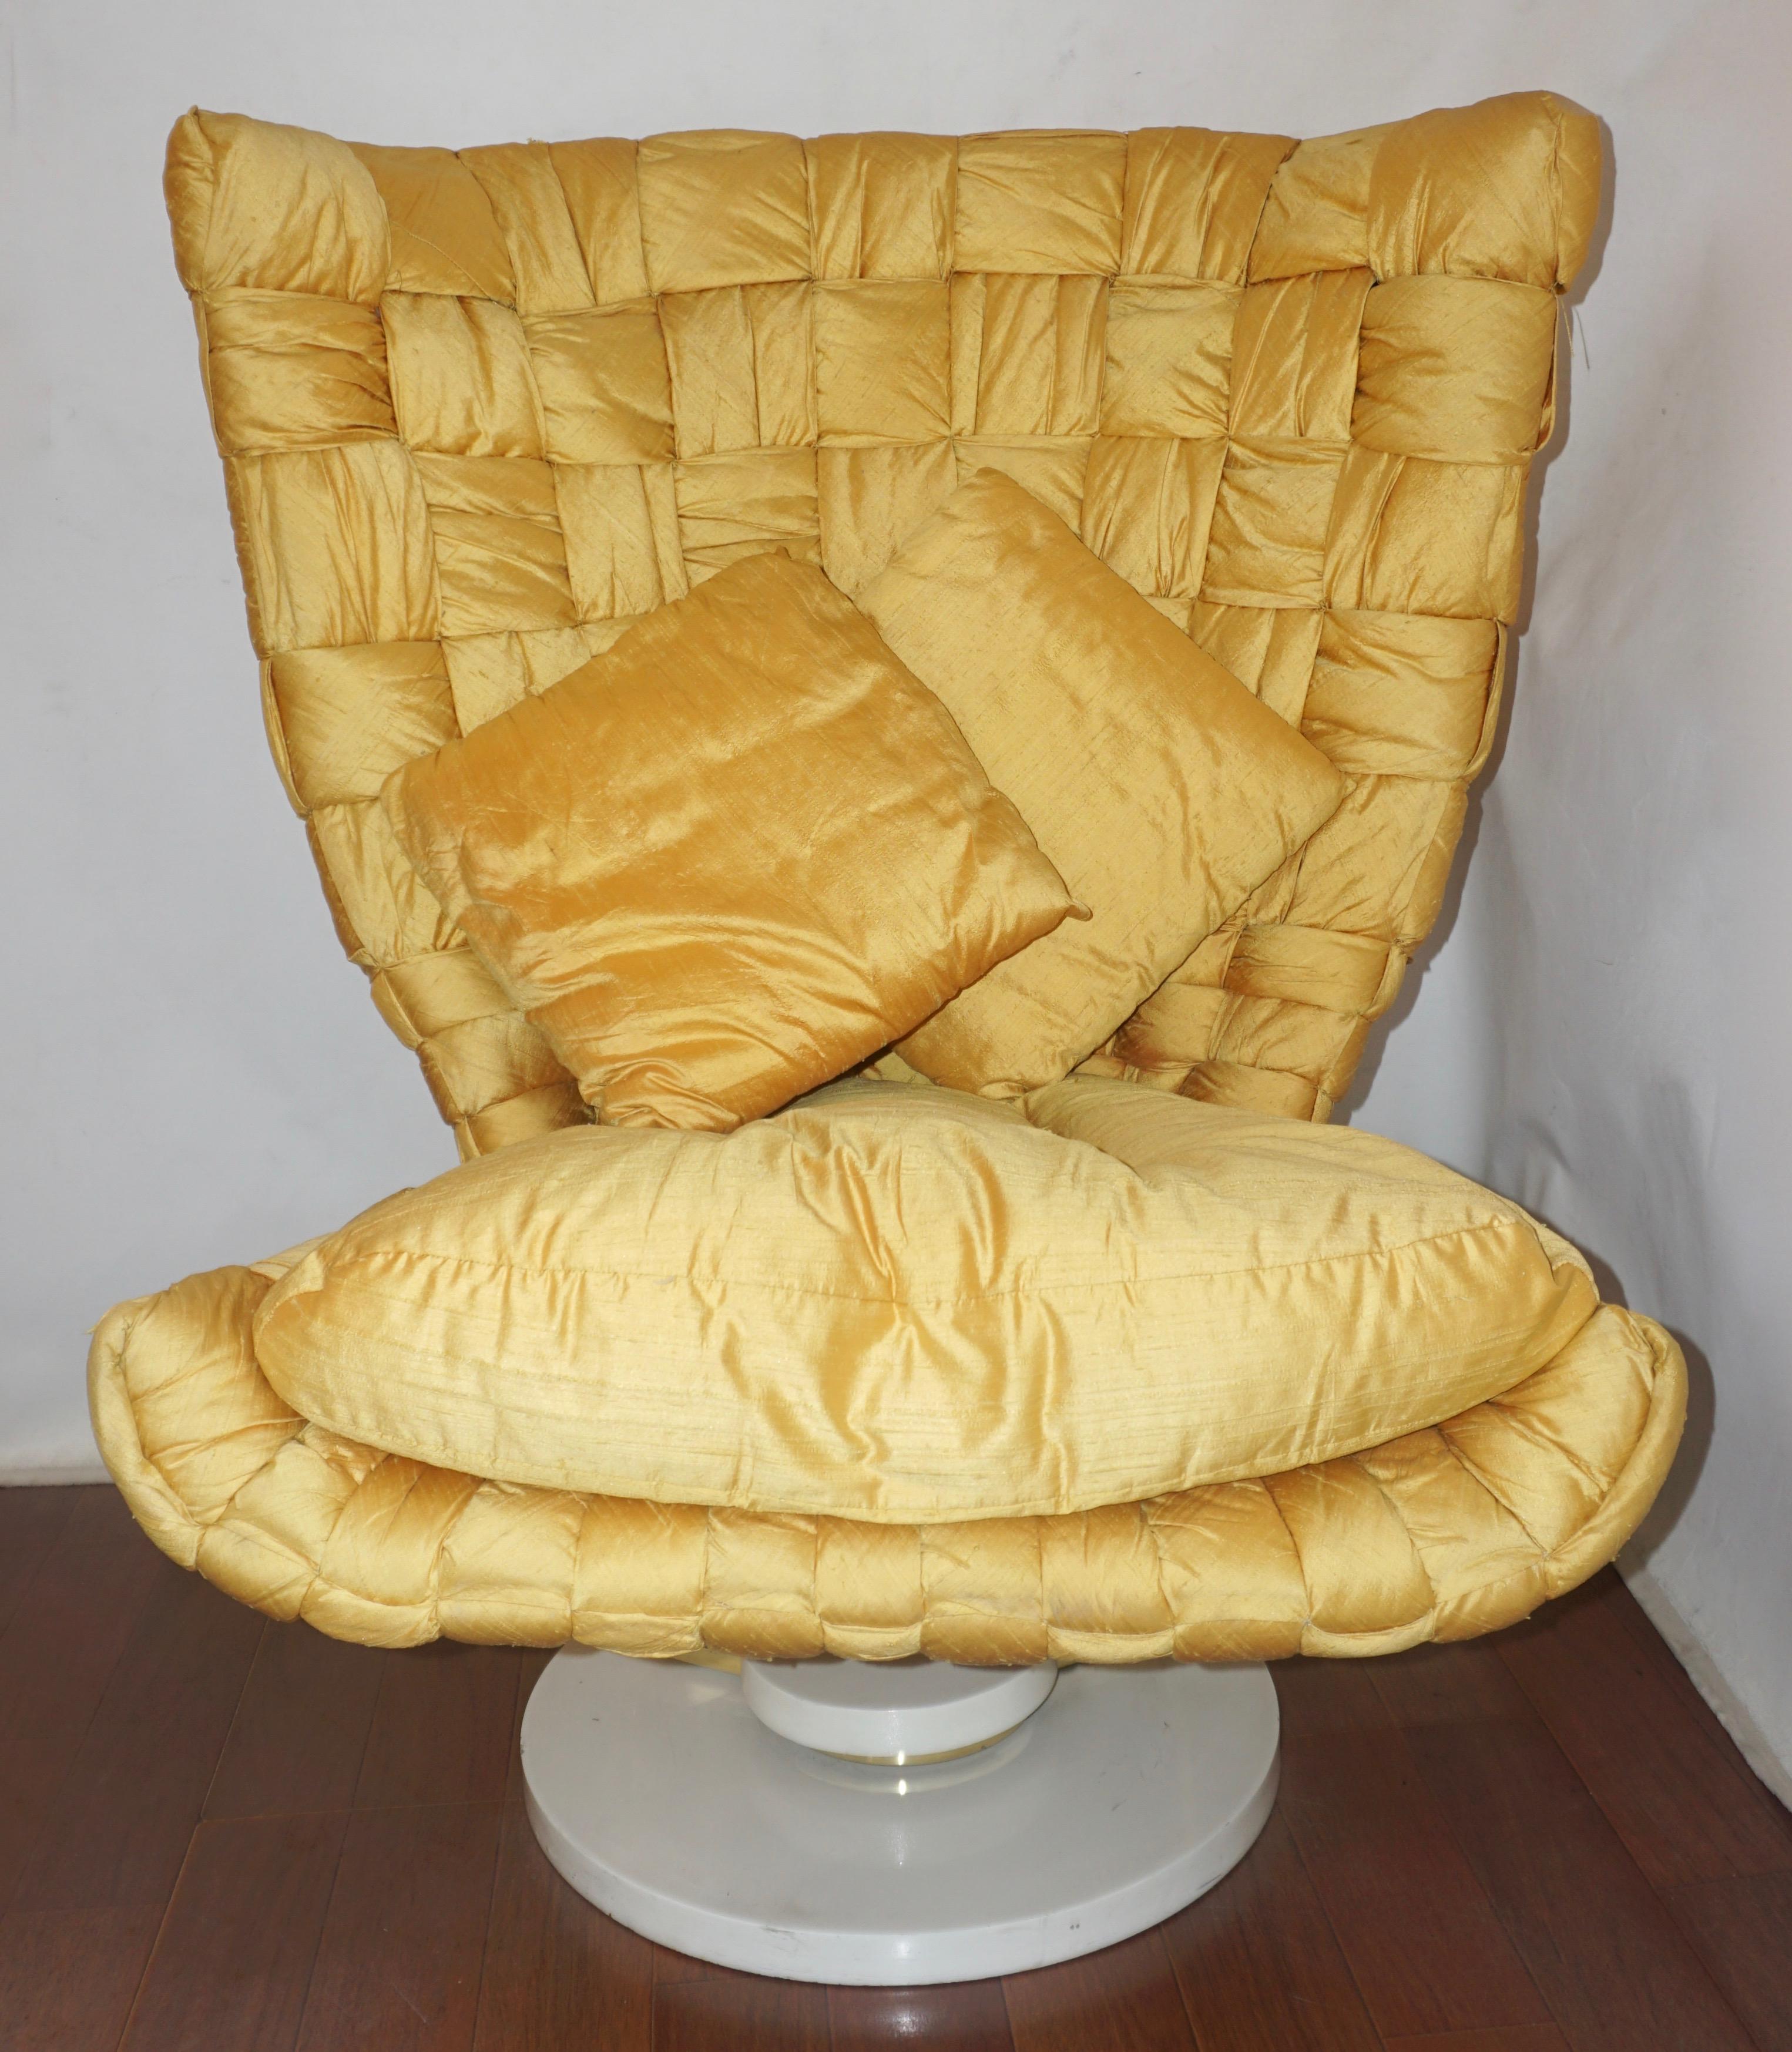 Iconic Italian design by Marzio Cecchi (1940-1990), 1970s mid-20th century lounge chair with seat cushion and 2 small decorative pillows, original intertwined raw silk fabric in a glowing yellow, elegant embracing high back on brass support